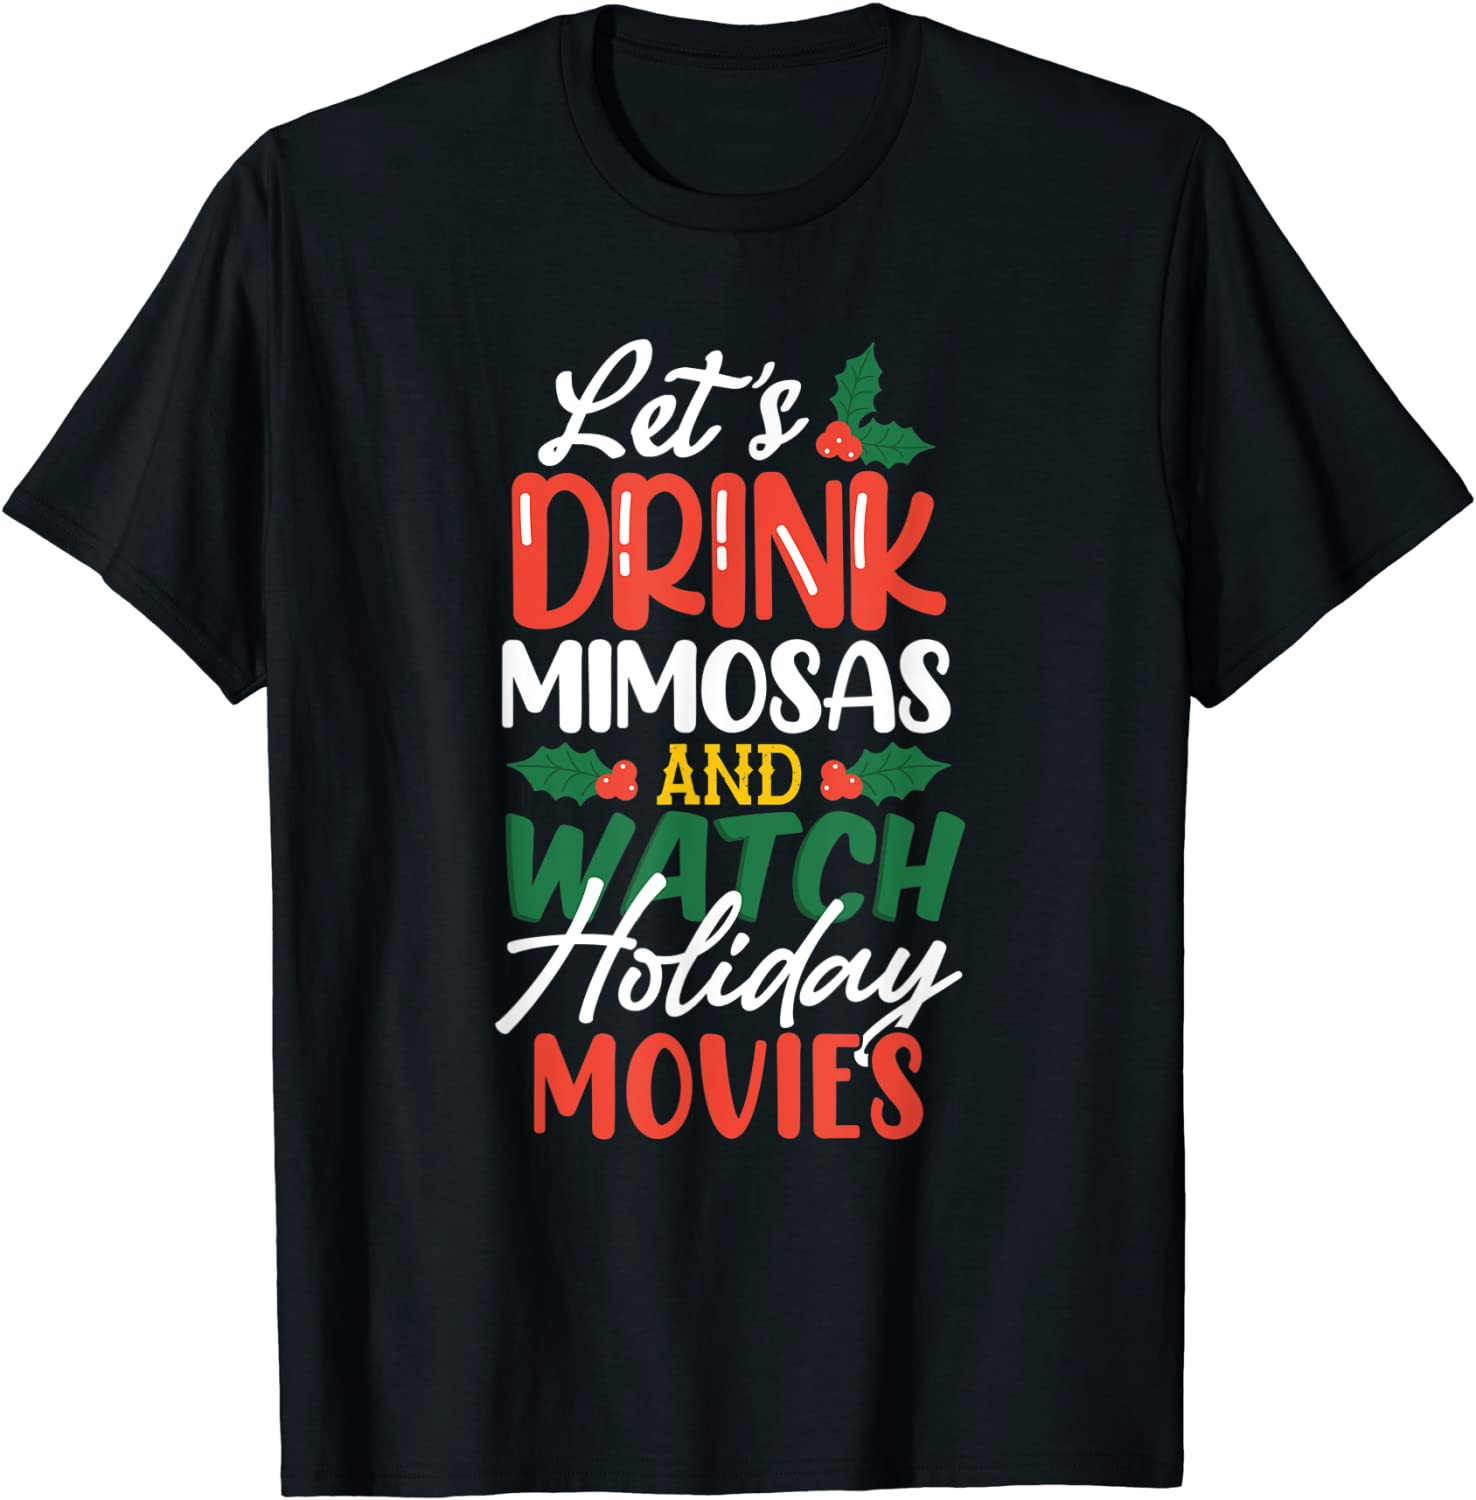 Let's Drink Mimosas And Watch Holiday Movies T-Shirt